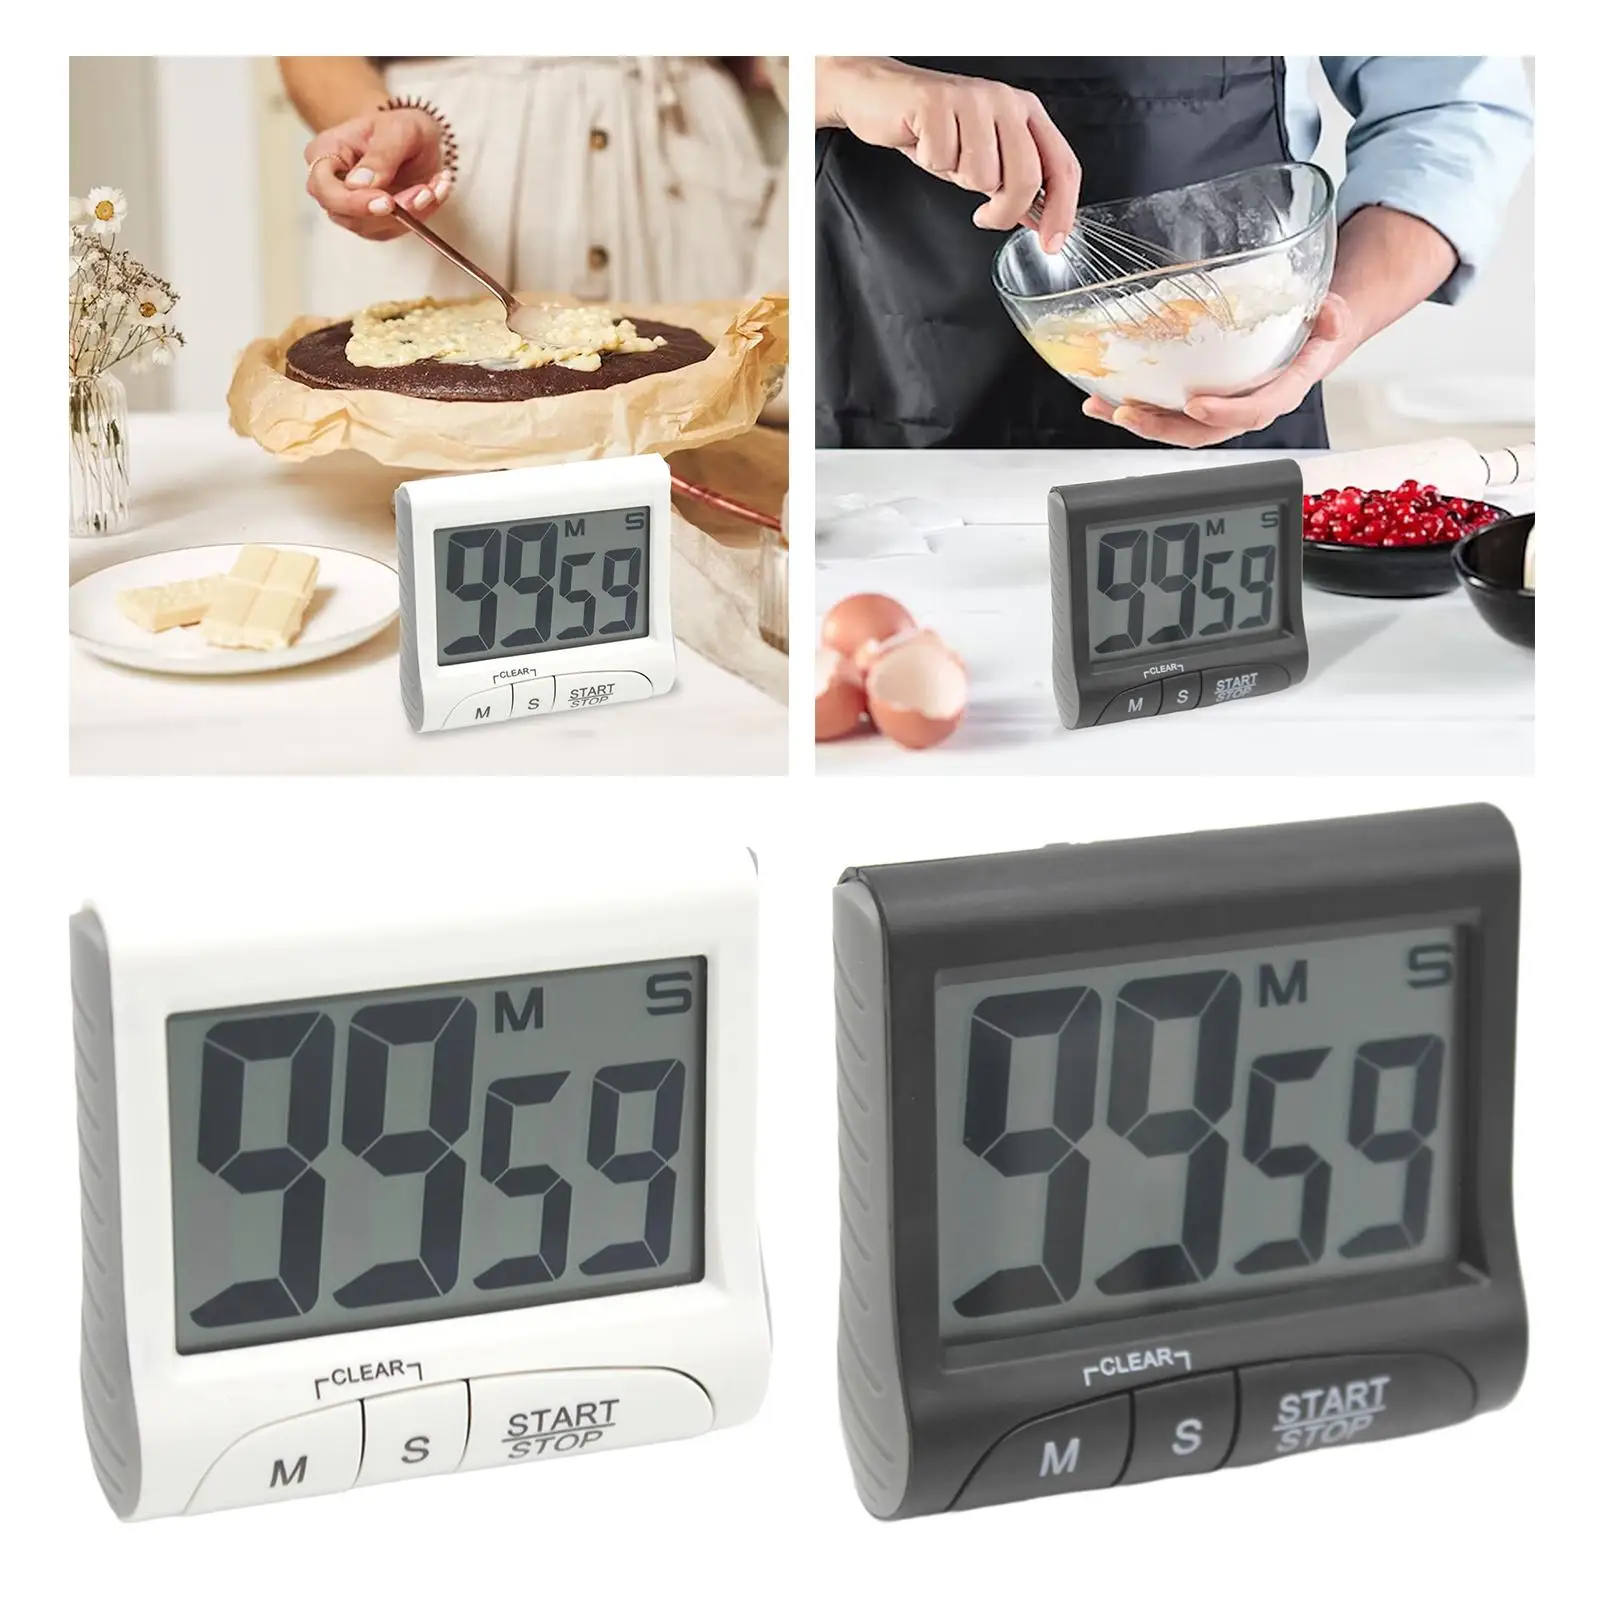 Digital Kitchen Timer Large LCD Display Loud Beeper Electronic Timer Cooking Timer for Game Baking Classroom Teaching Exercising